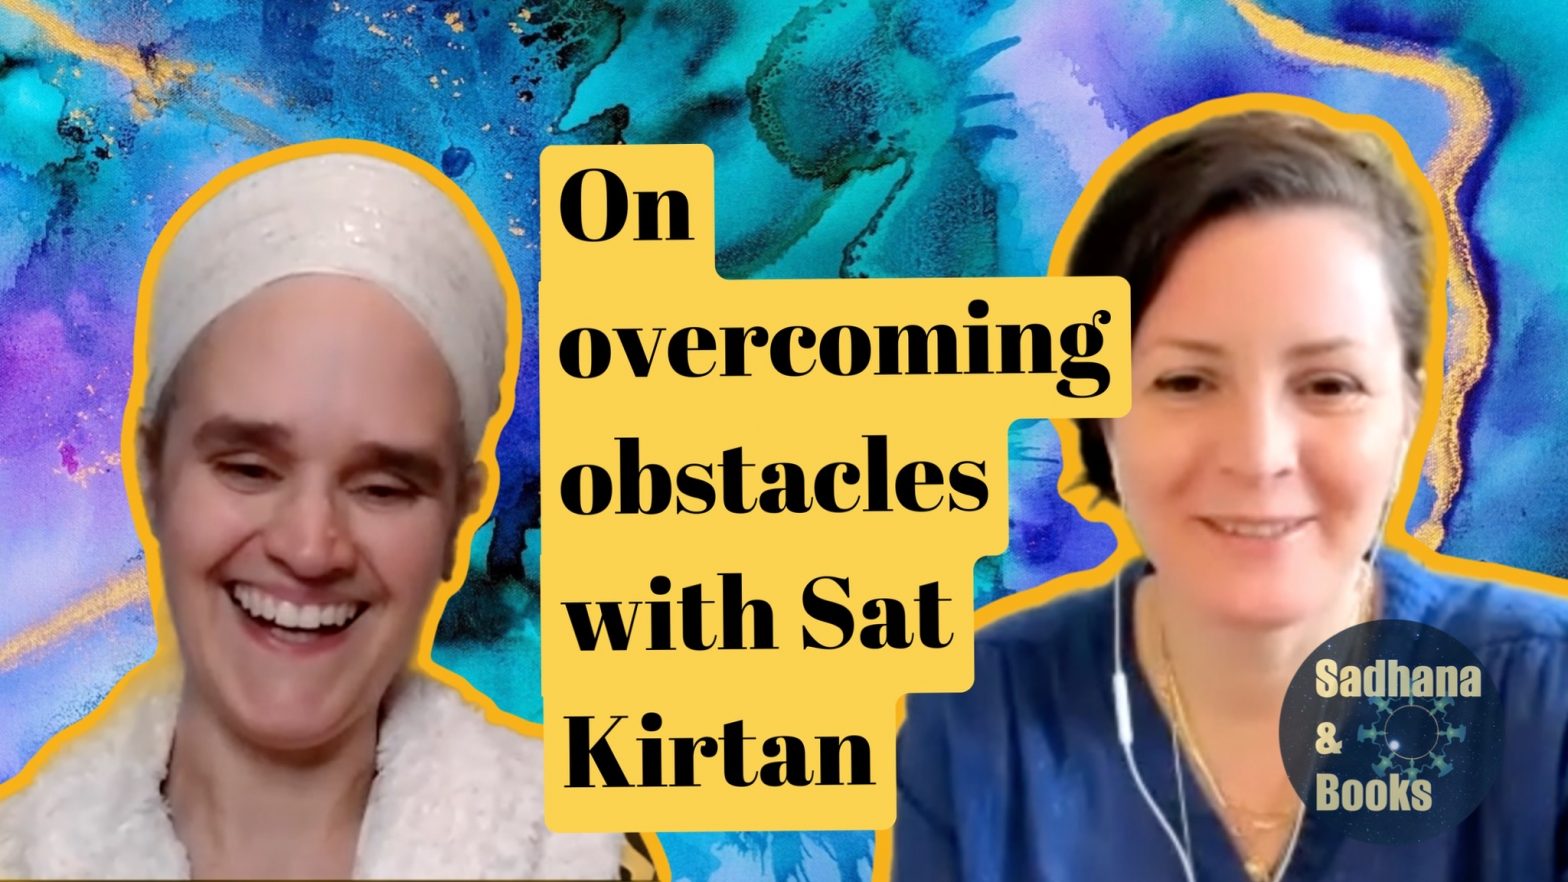 Sat Kirtan on overcoming obstacles